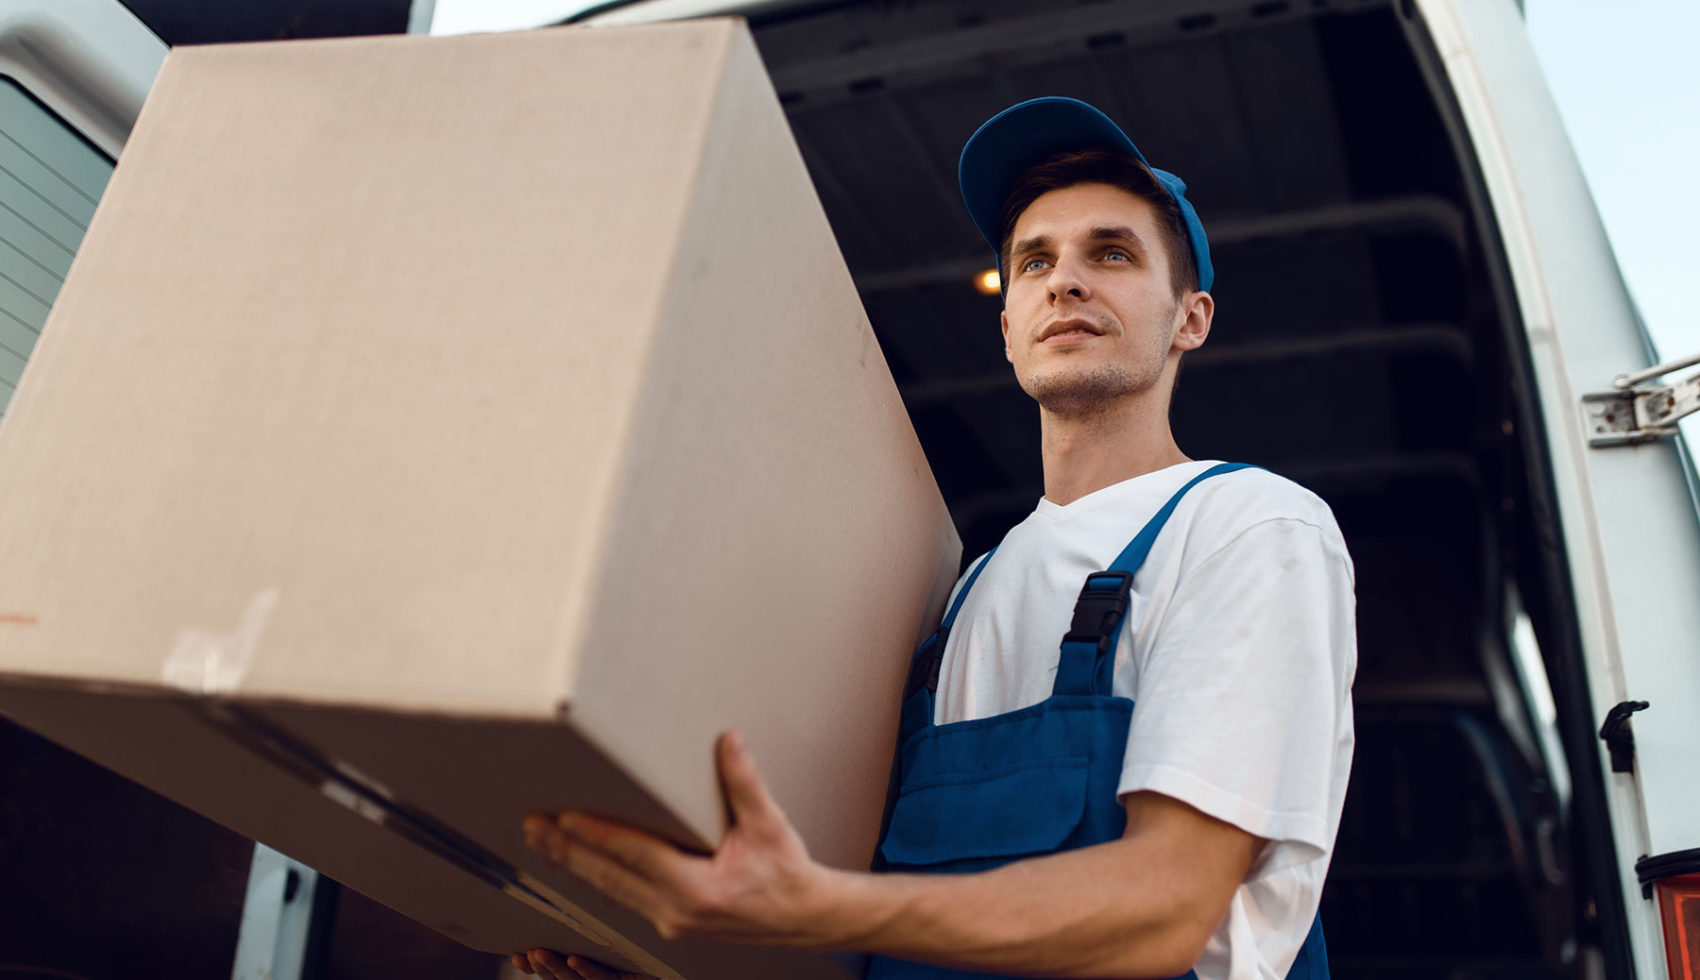 loader in uniform holding box delivery service